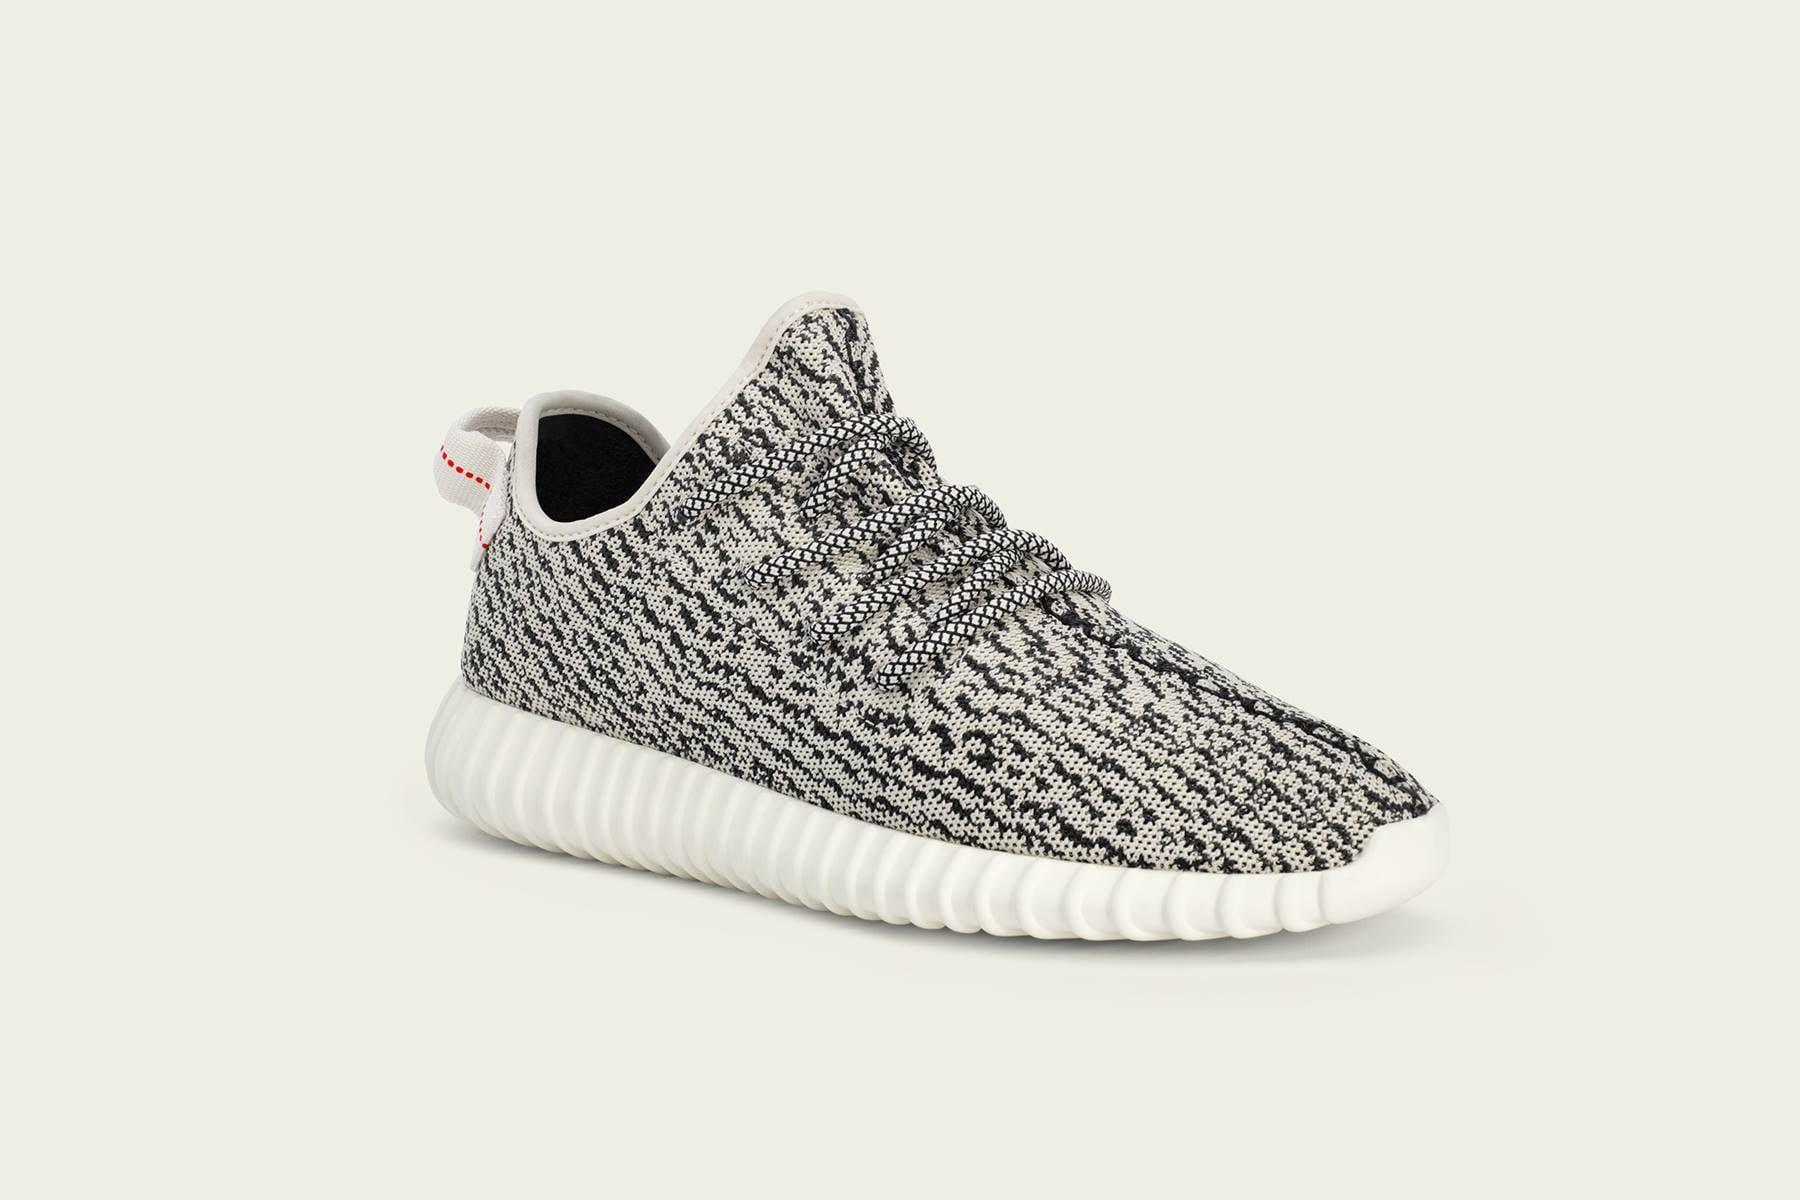 Black And White Adidas Yeezy Boost 350 HD Wallpaper